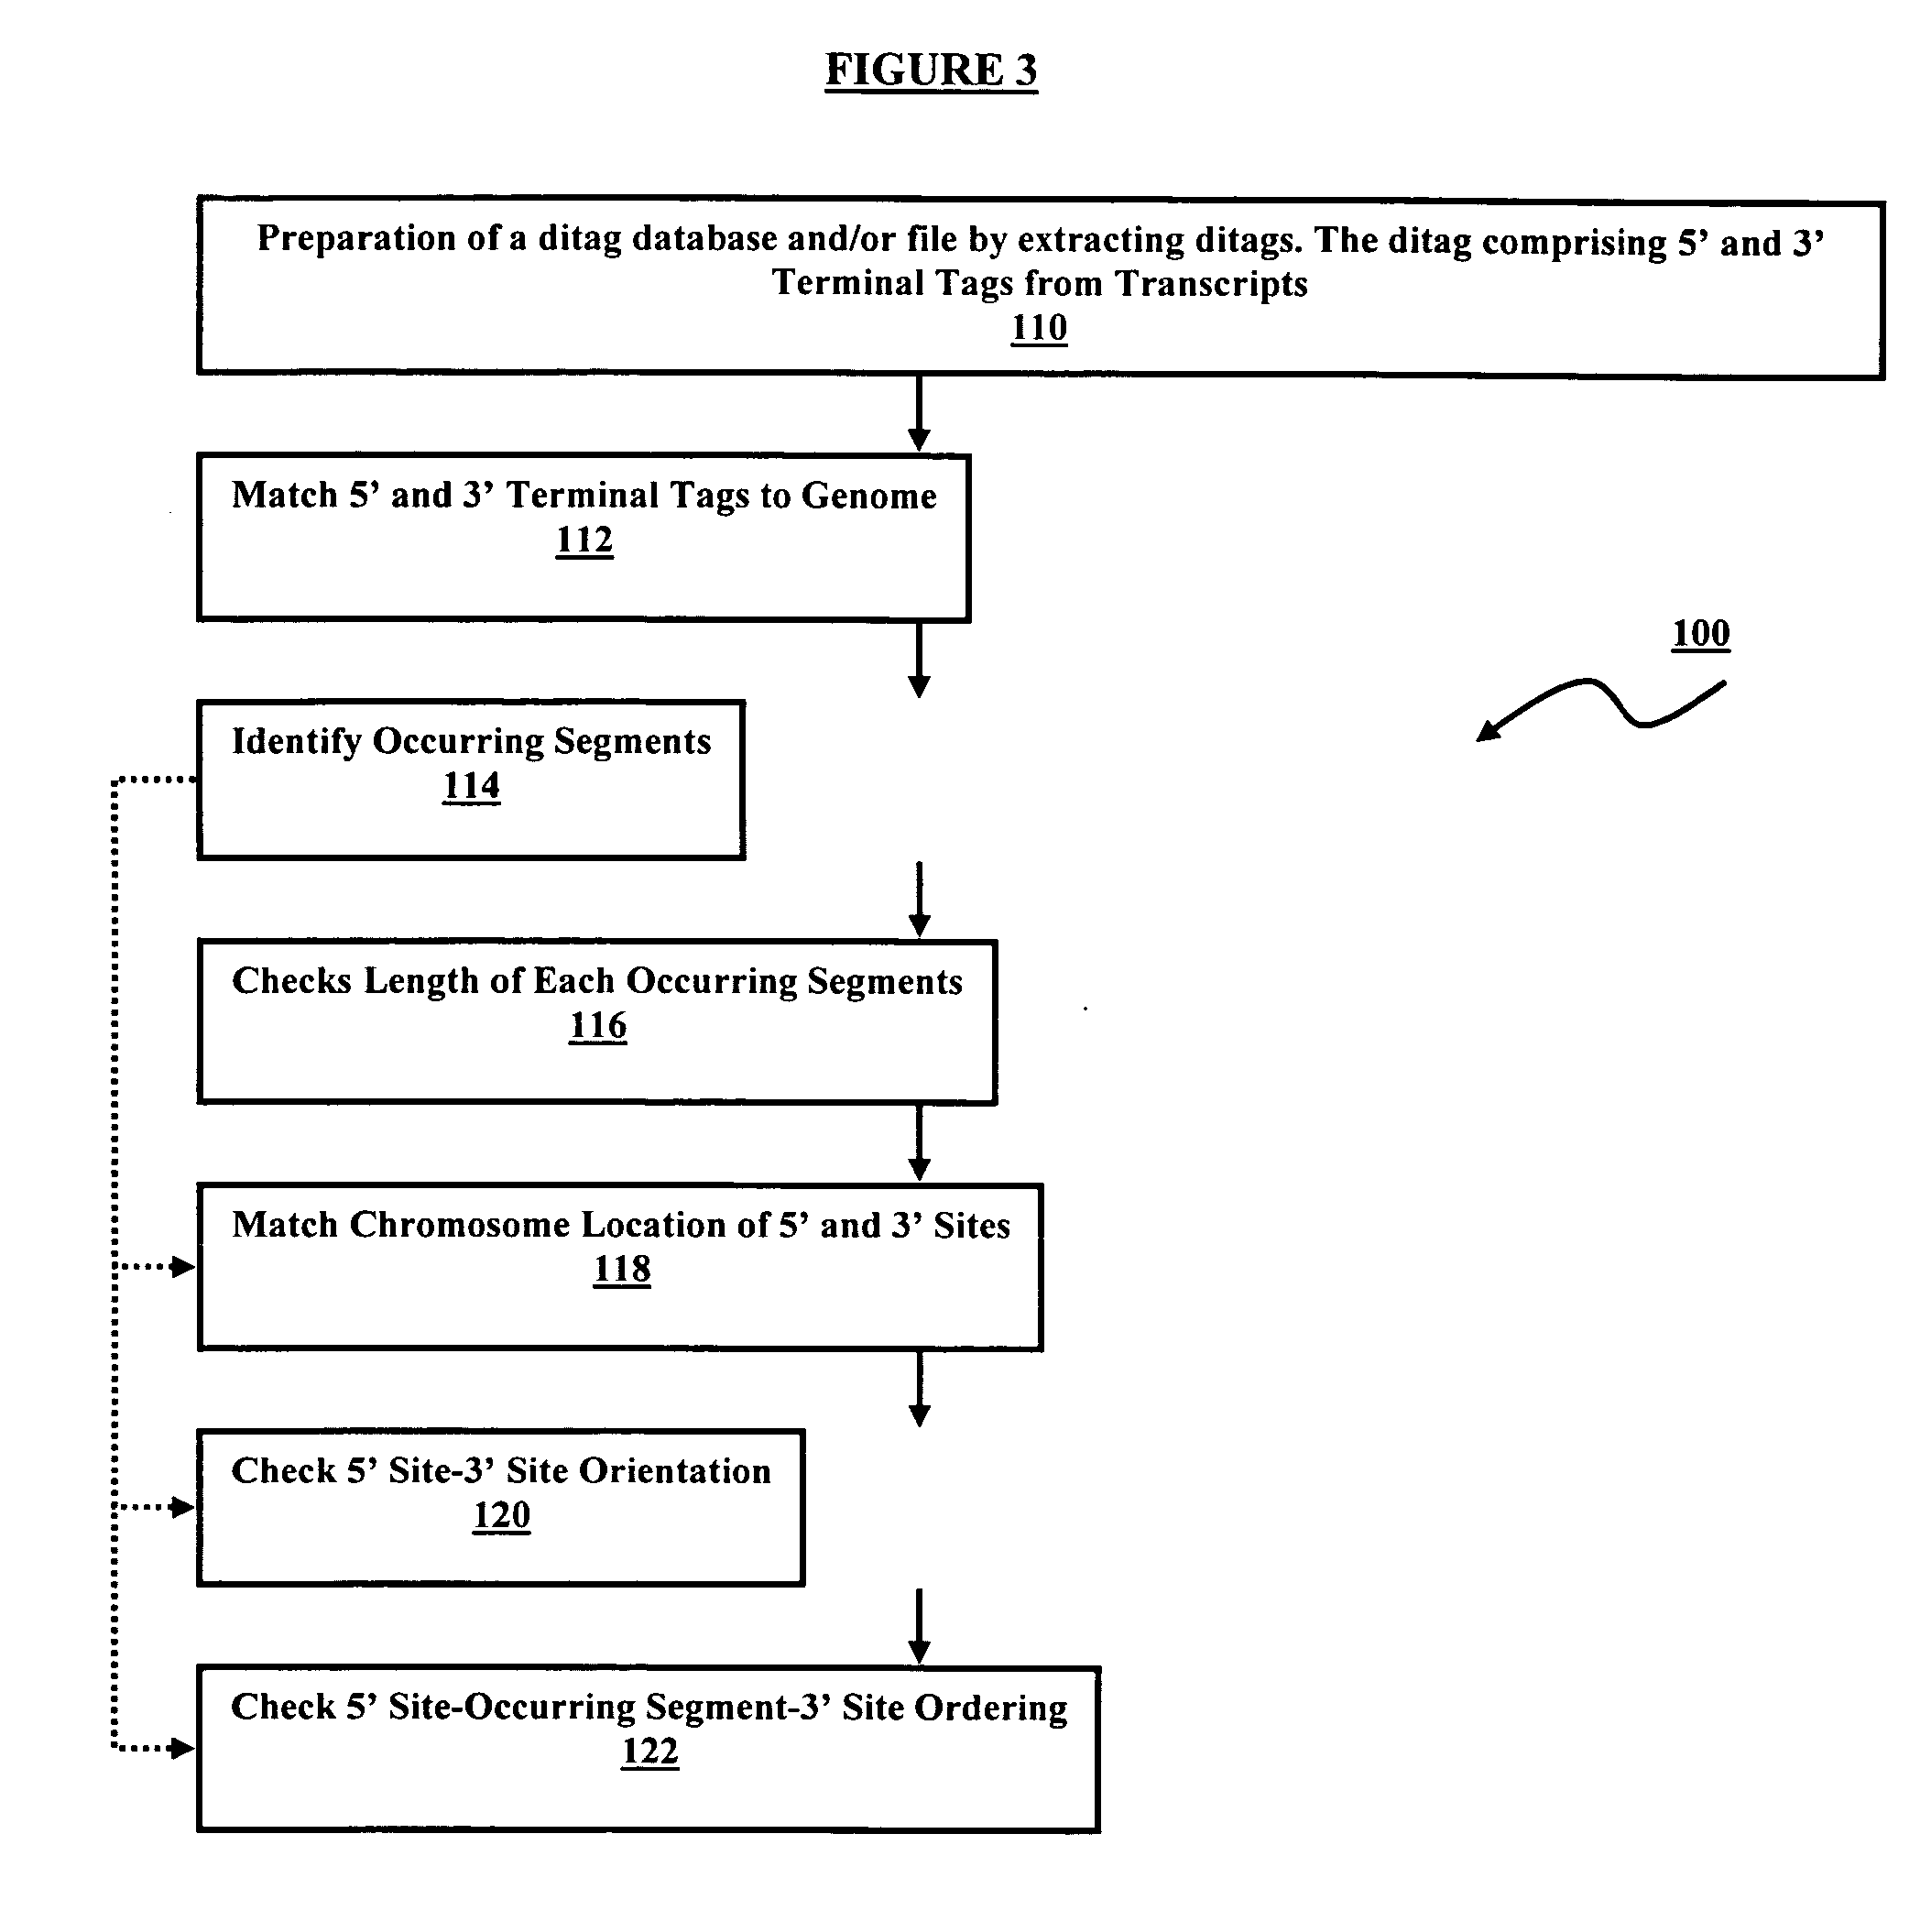 Method of processing and/or genome mapping of ditag sequences